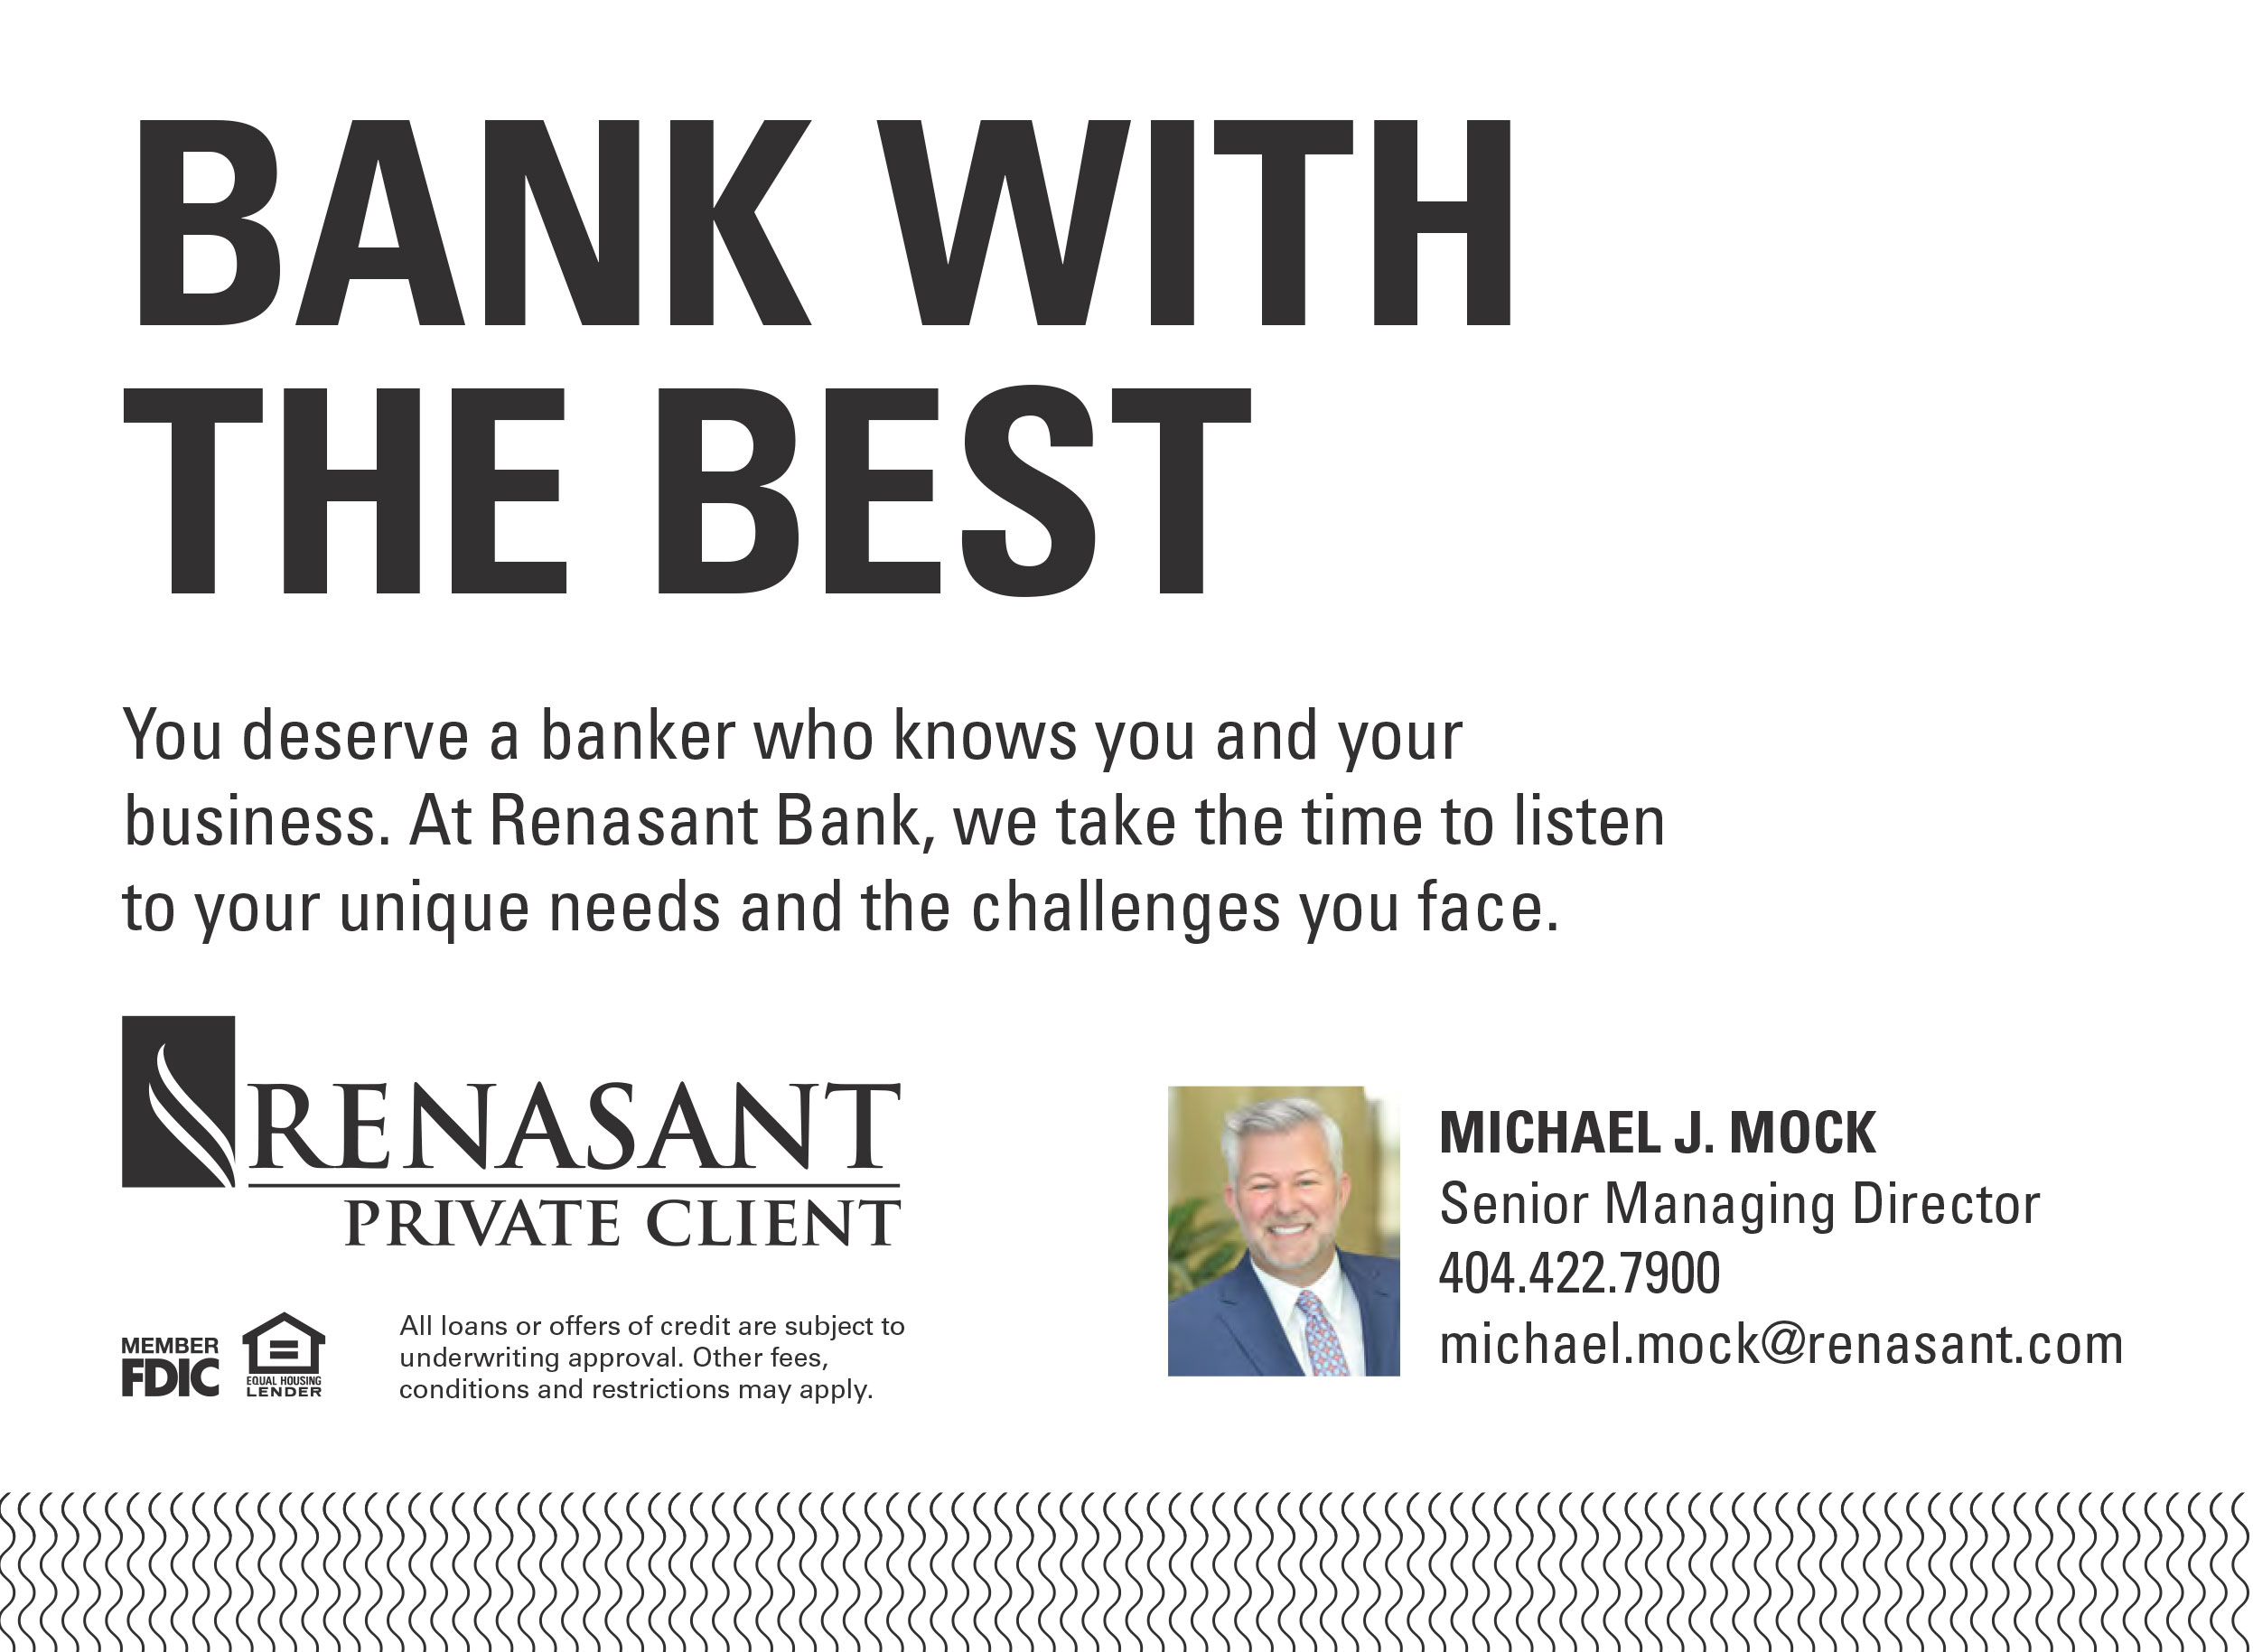 Bank with the Best - Resasant Bank